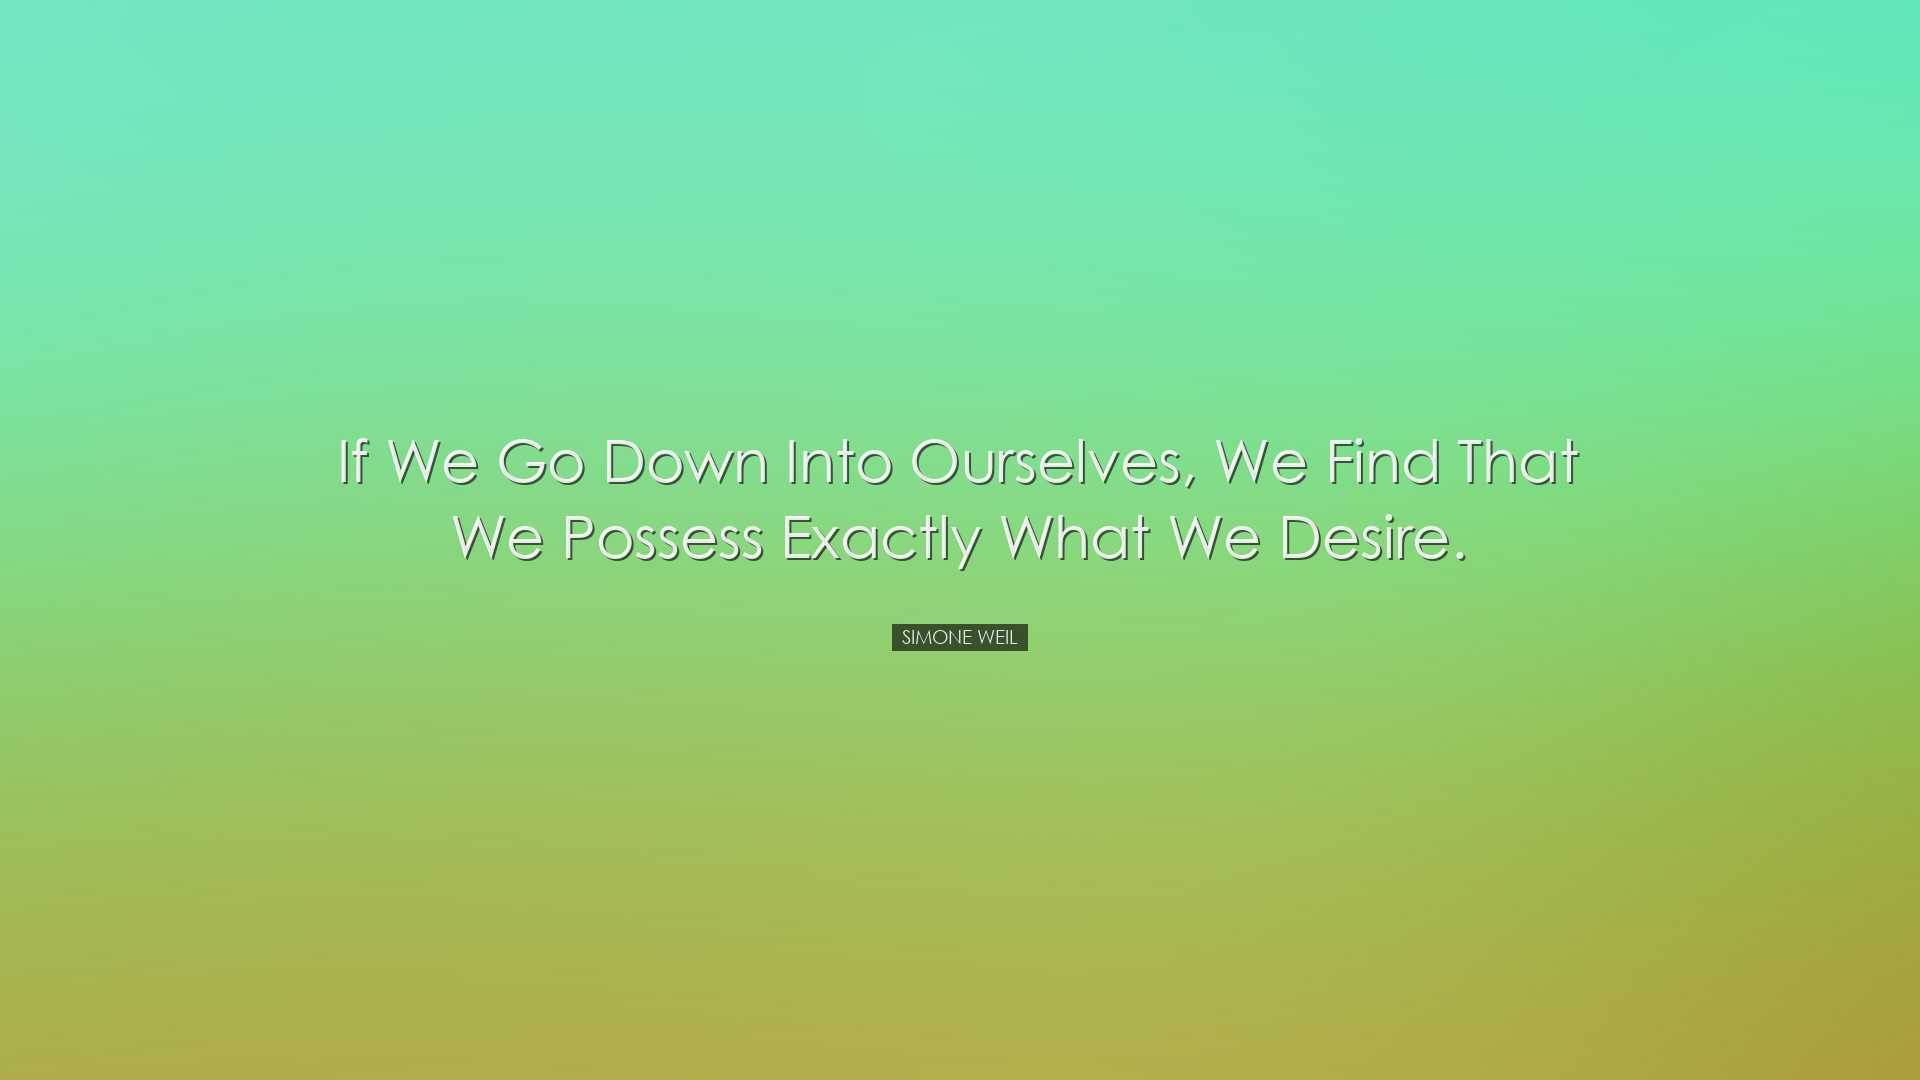 If we go down into ourselves, we find that we possess exactly what